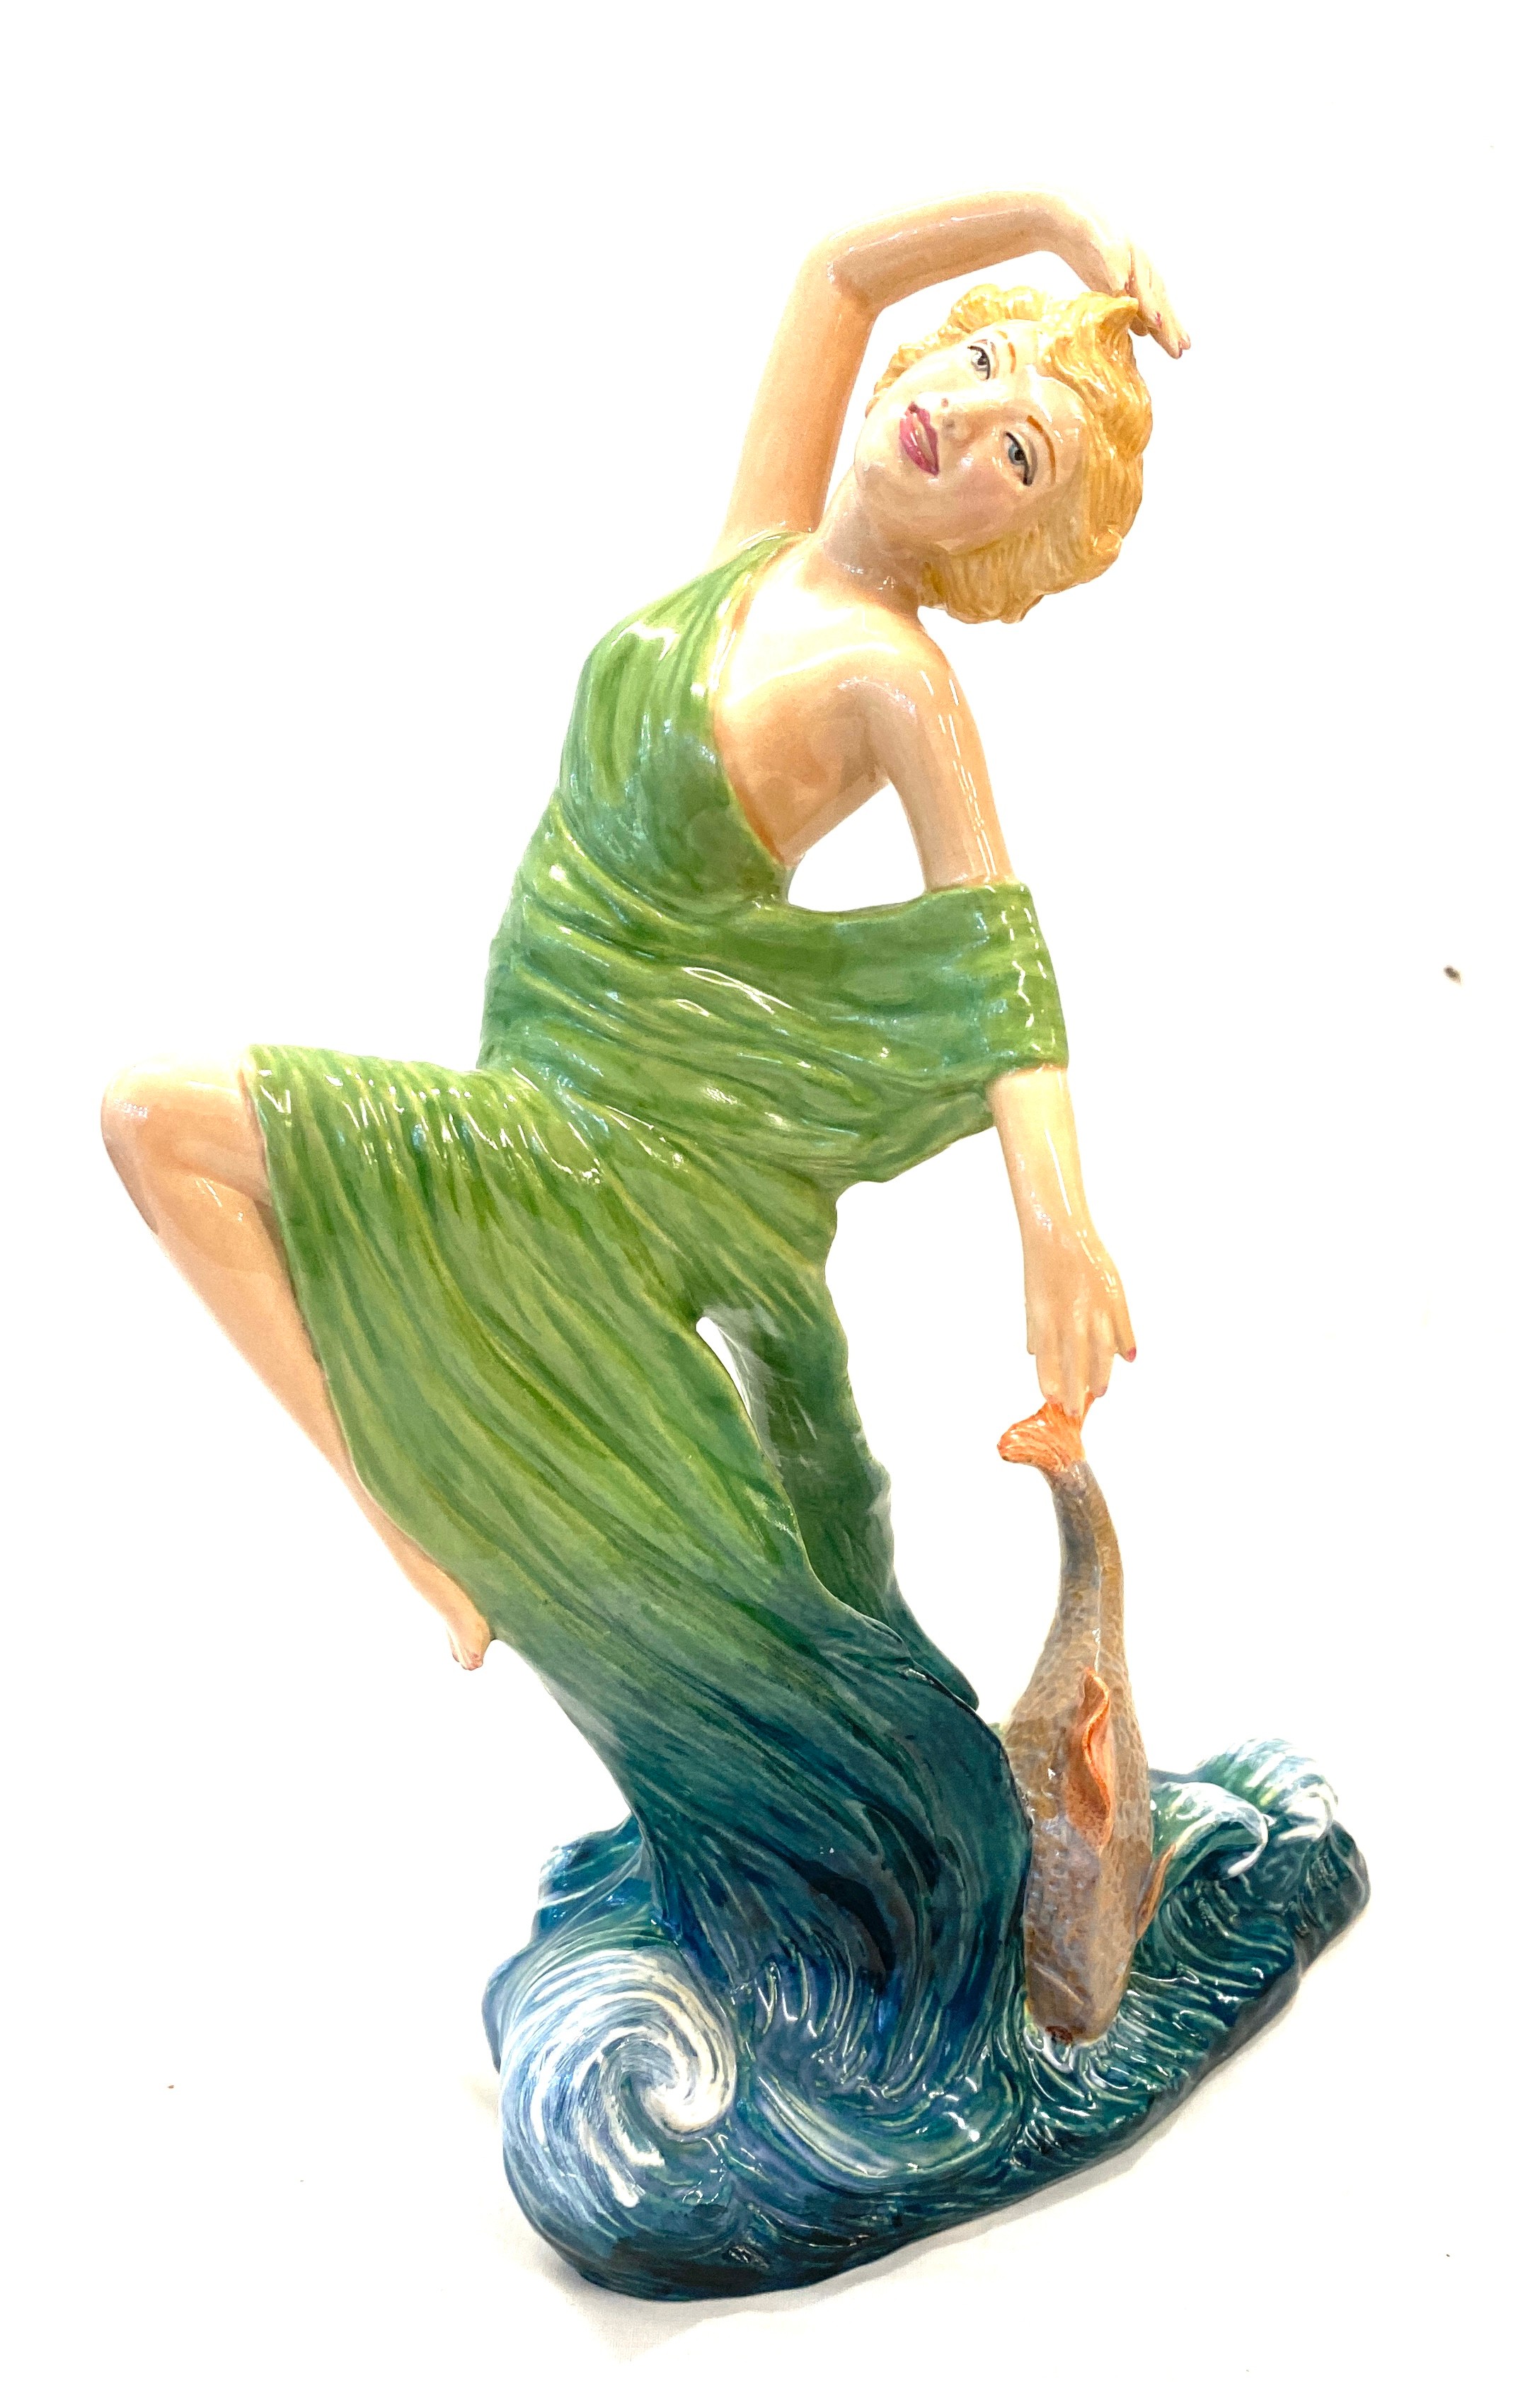 Fieldings Crown Devon limited edition figurine number 15 of 250. Dated 2001. 11 inches tall